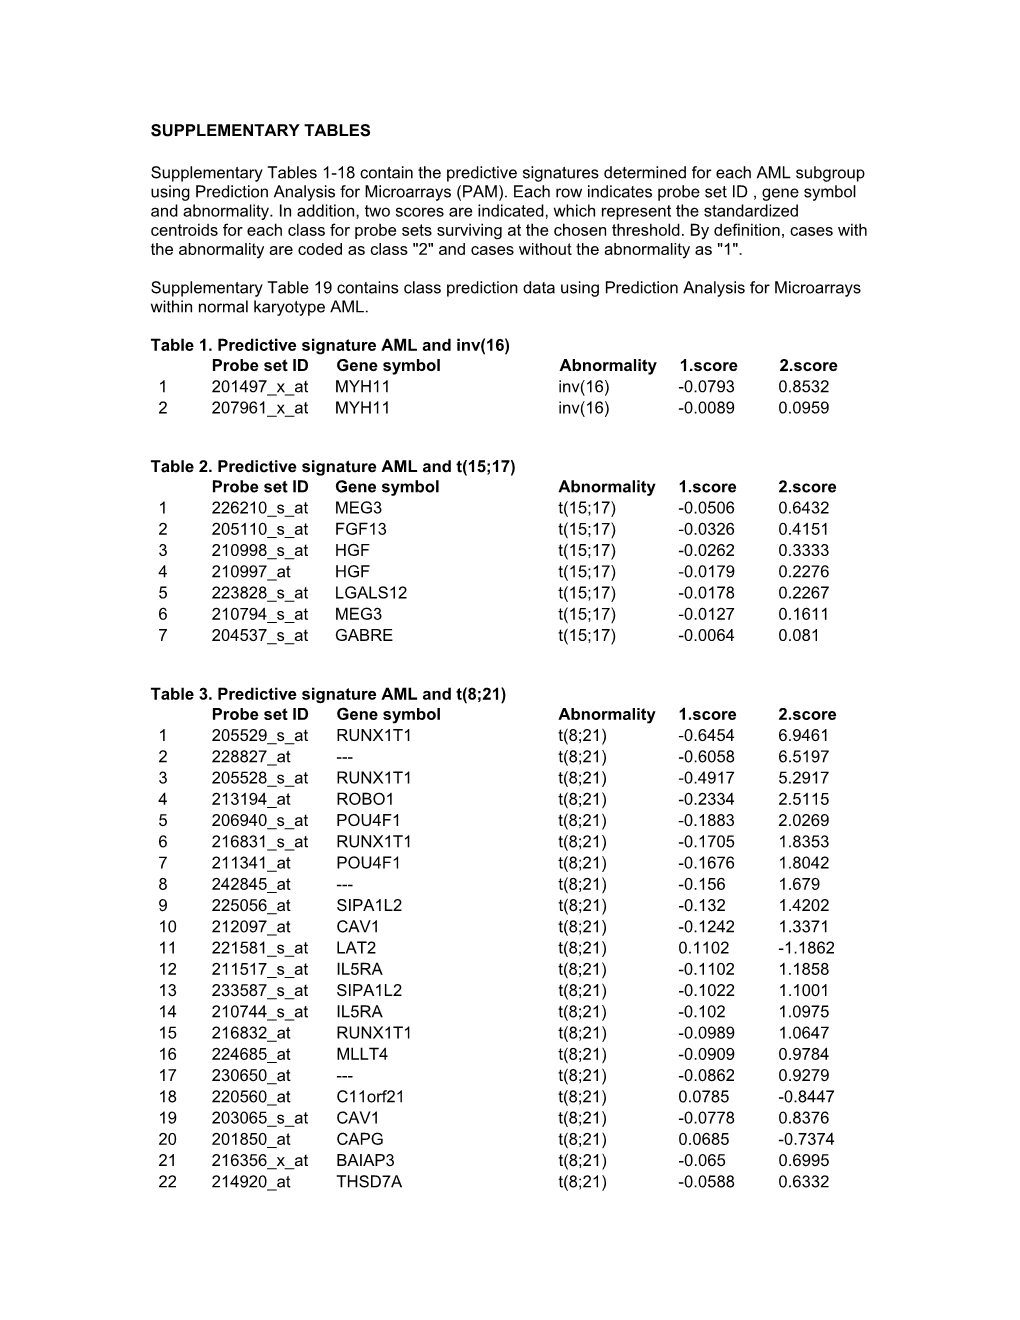 Supplementary Tables 1-18 Contain the Predictive Signatures Determined for Each AML Subgroup Using Prediction Analysis for Microarrays (PAM)